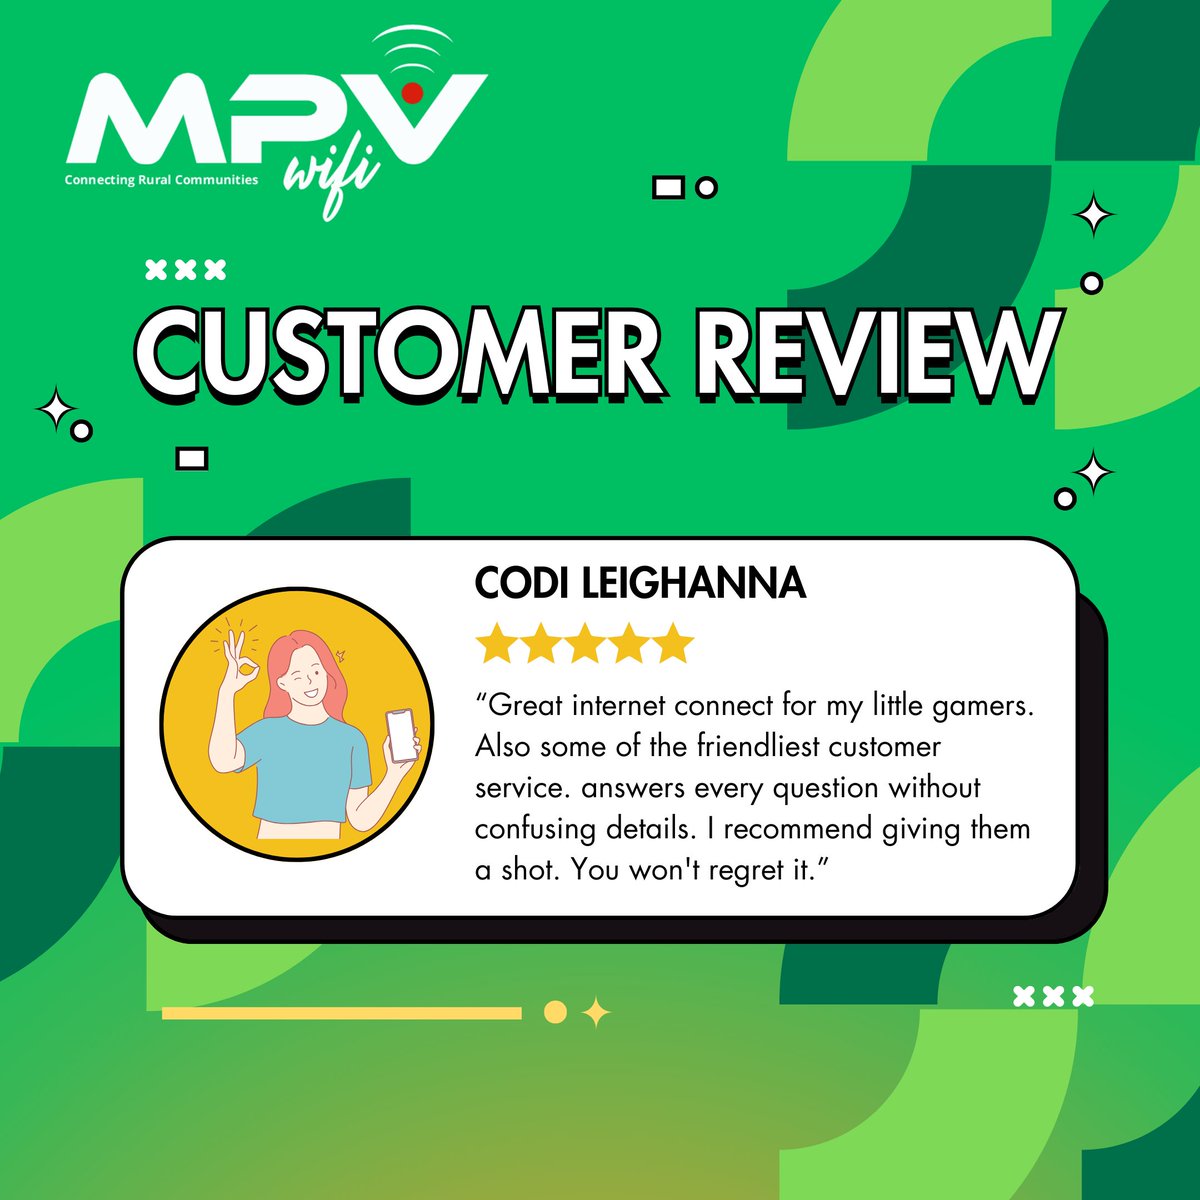 Here's what some of our customers have to say about their service with MPV Wifi! No matter your internet needs, we are here to exceed them with our service.